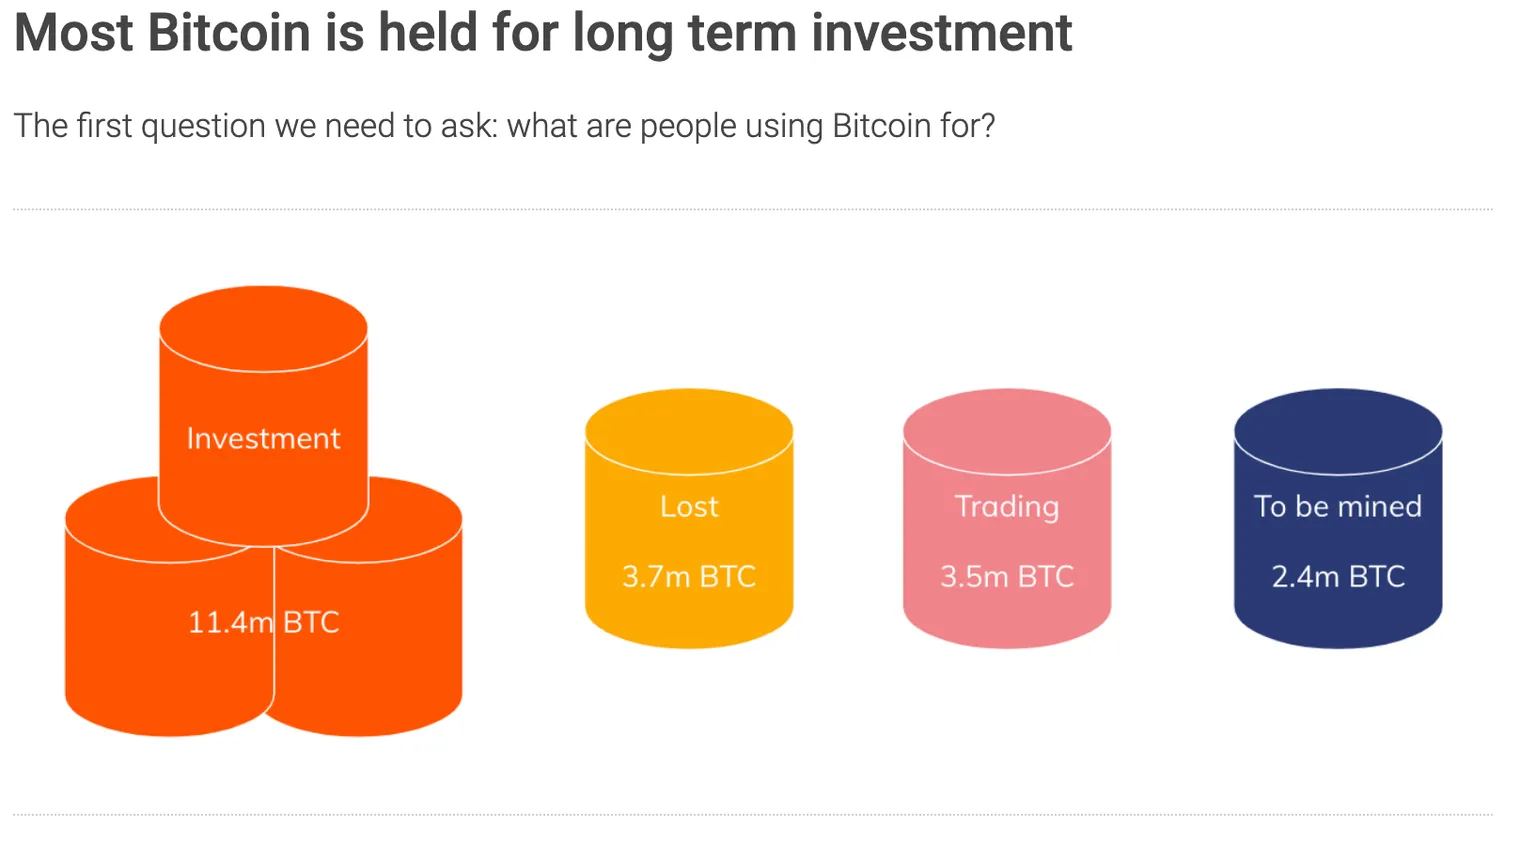 Most Bitcoin is held as long-term investment.